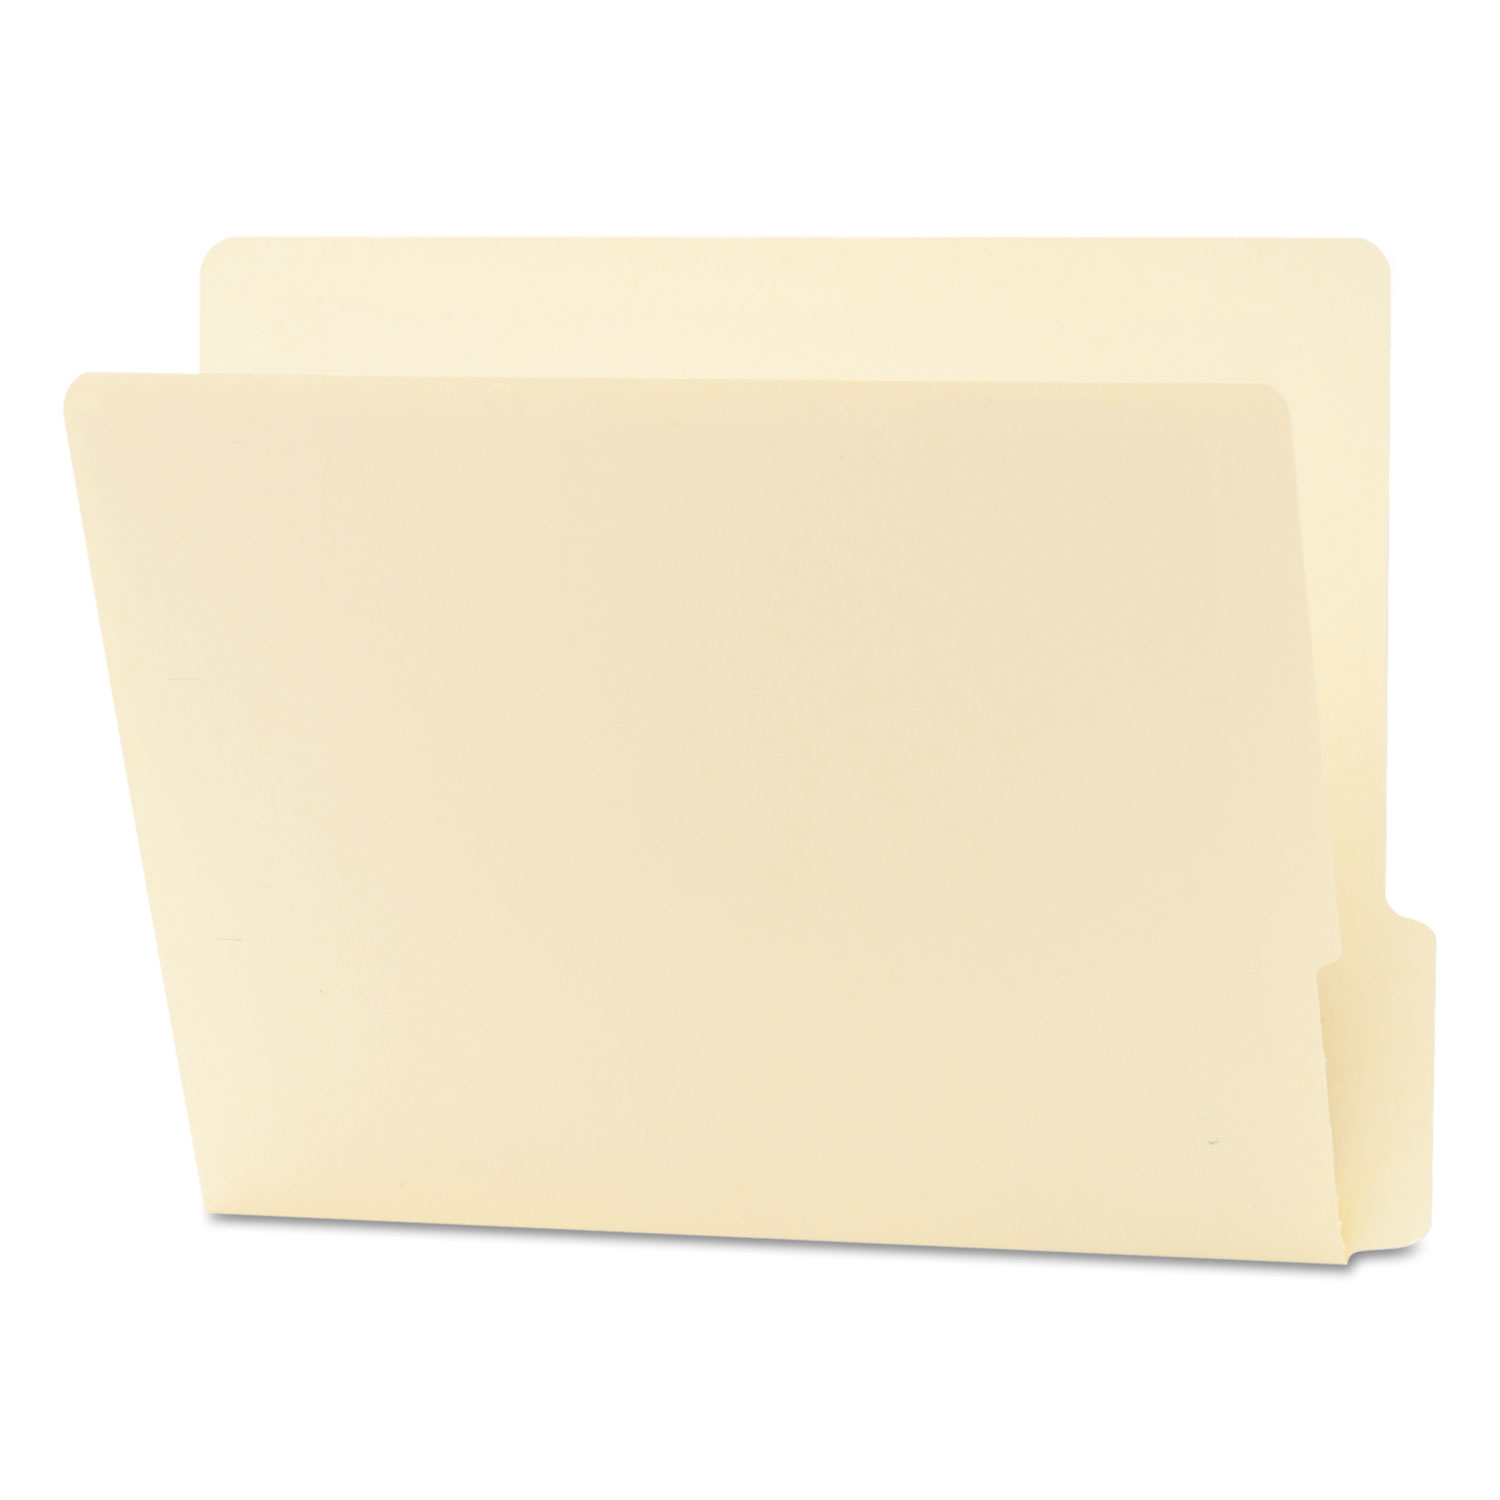  Smead 24137 Heavyweight Manila End Tab Folders, 9 Front, 1/3-Cut Tabs, Bottom Position, Letter Size, 100/Box (SMD24137) 